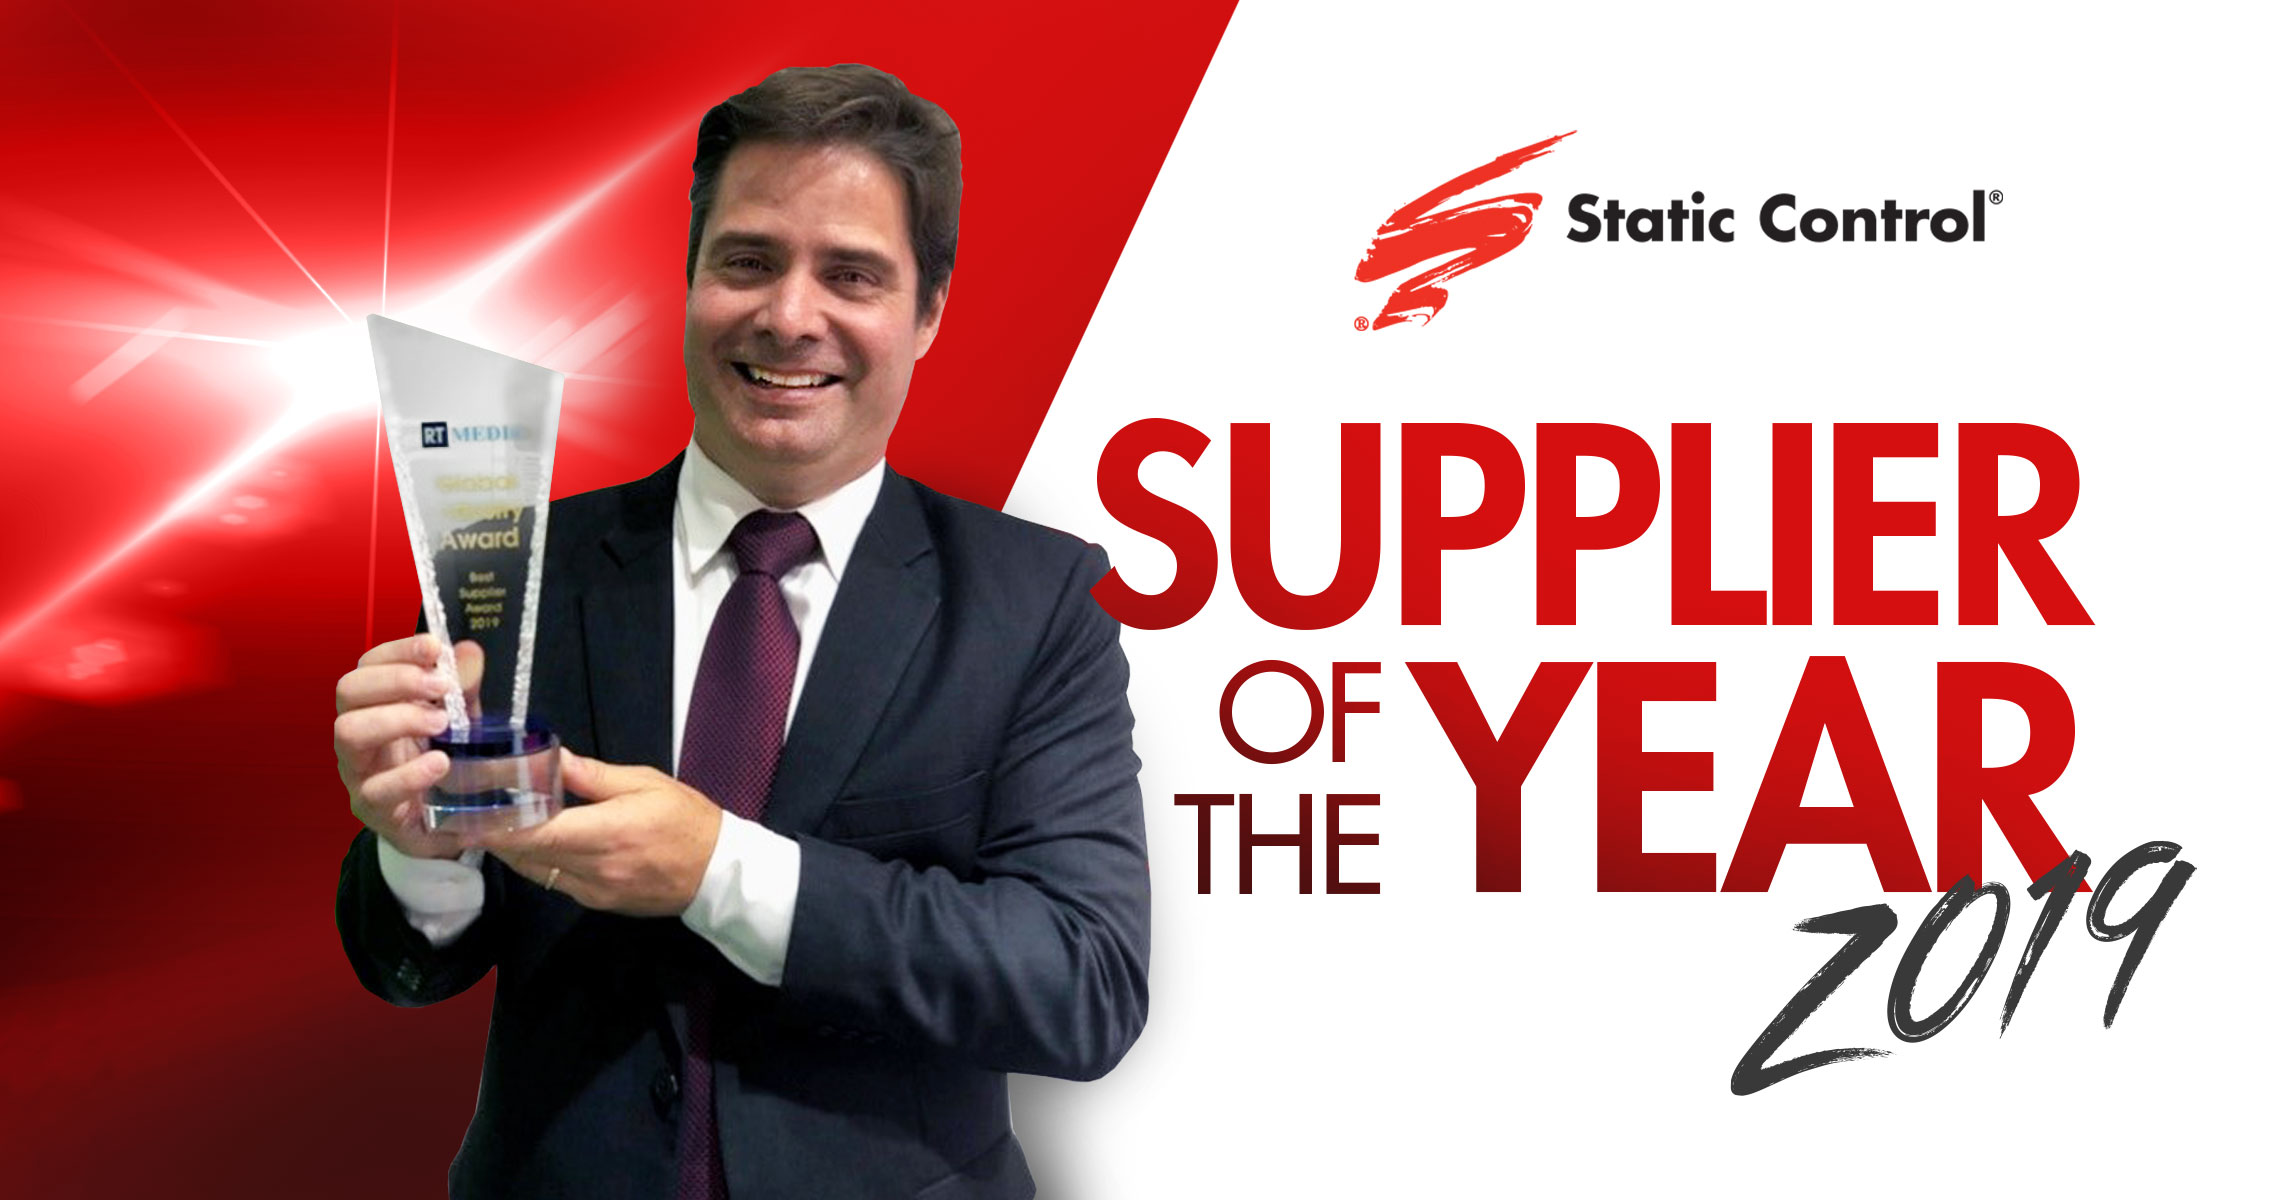 Static Control Wins Supplier of the Year 